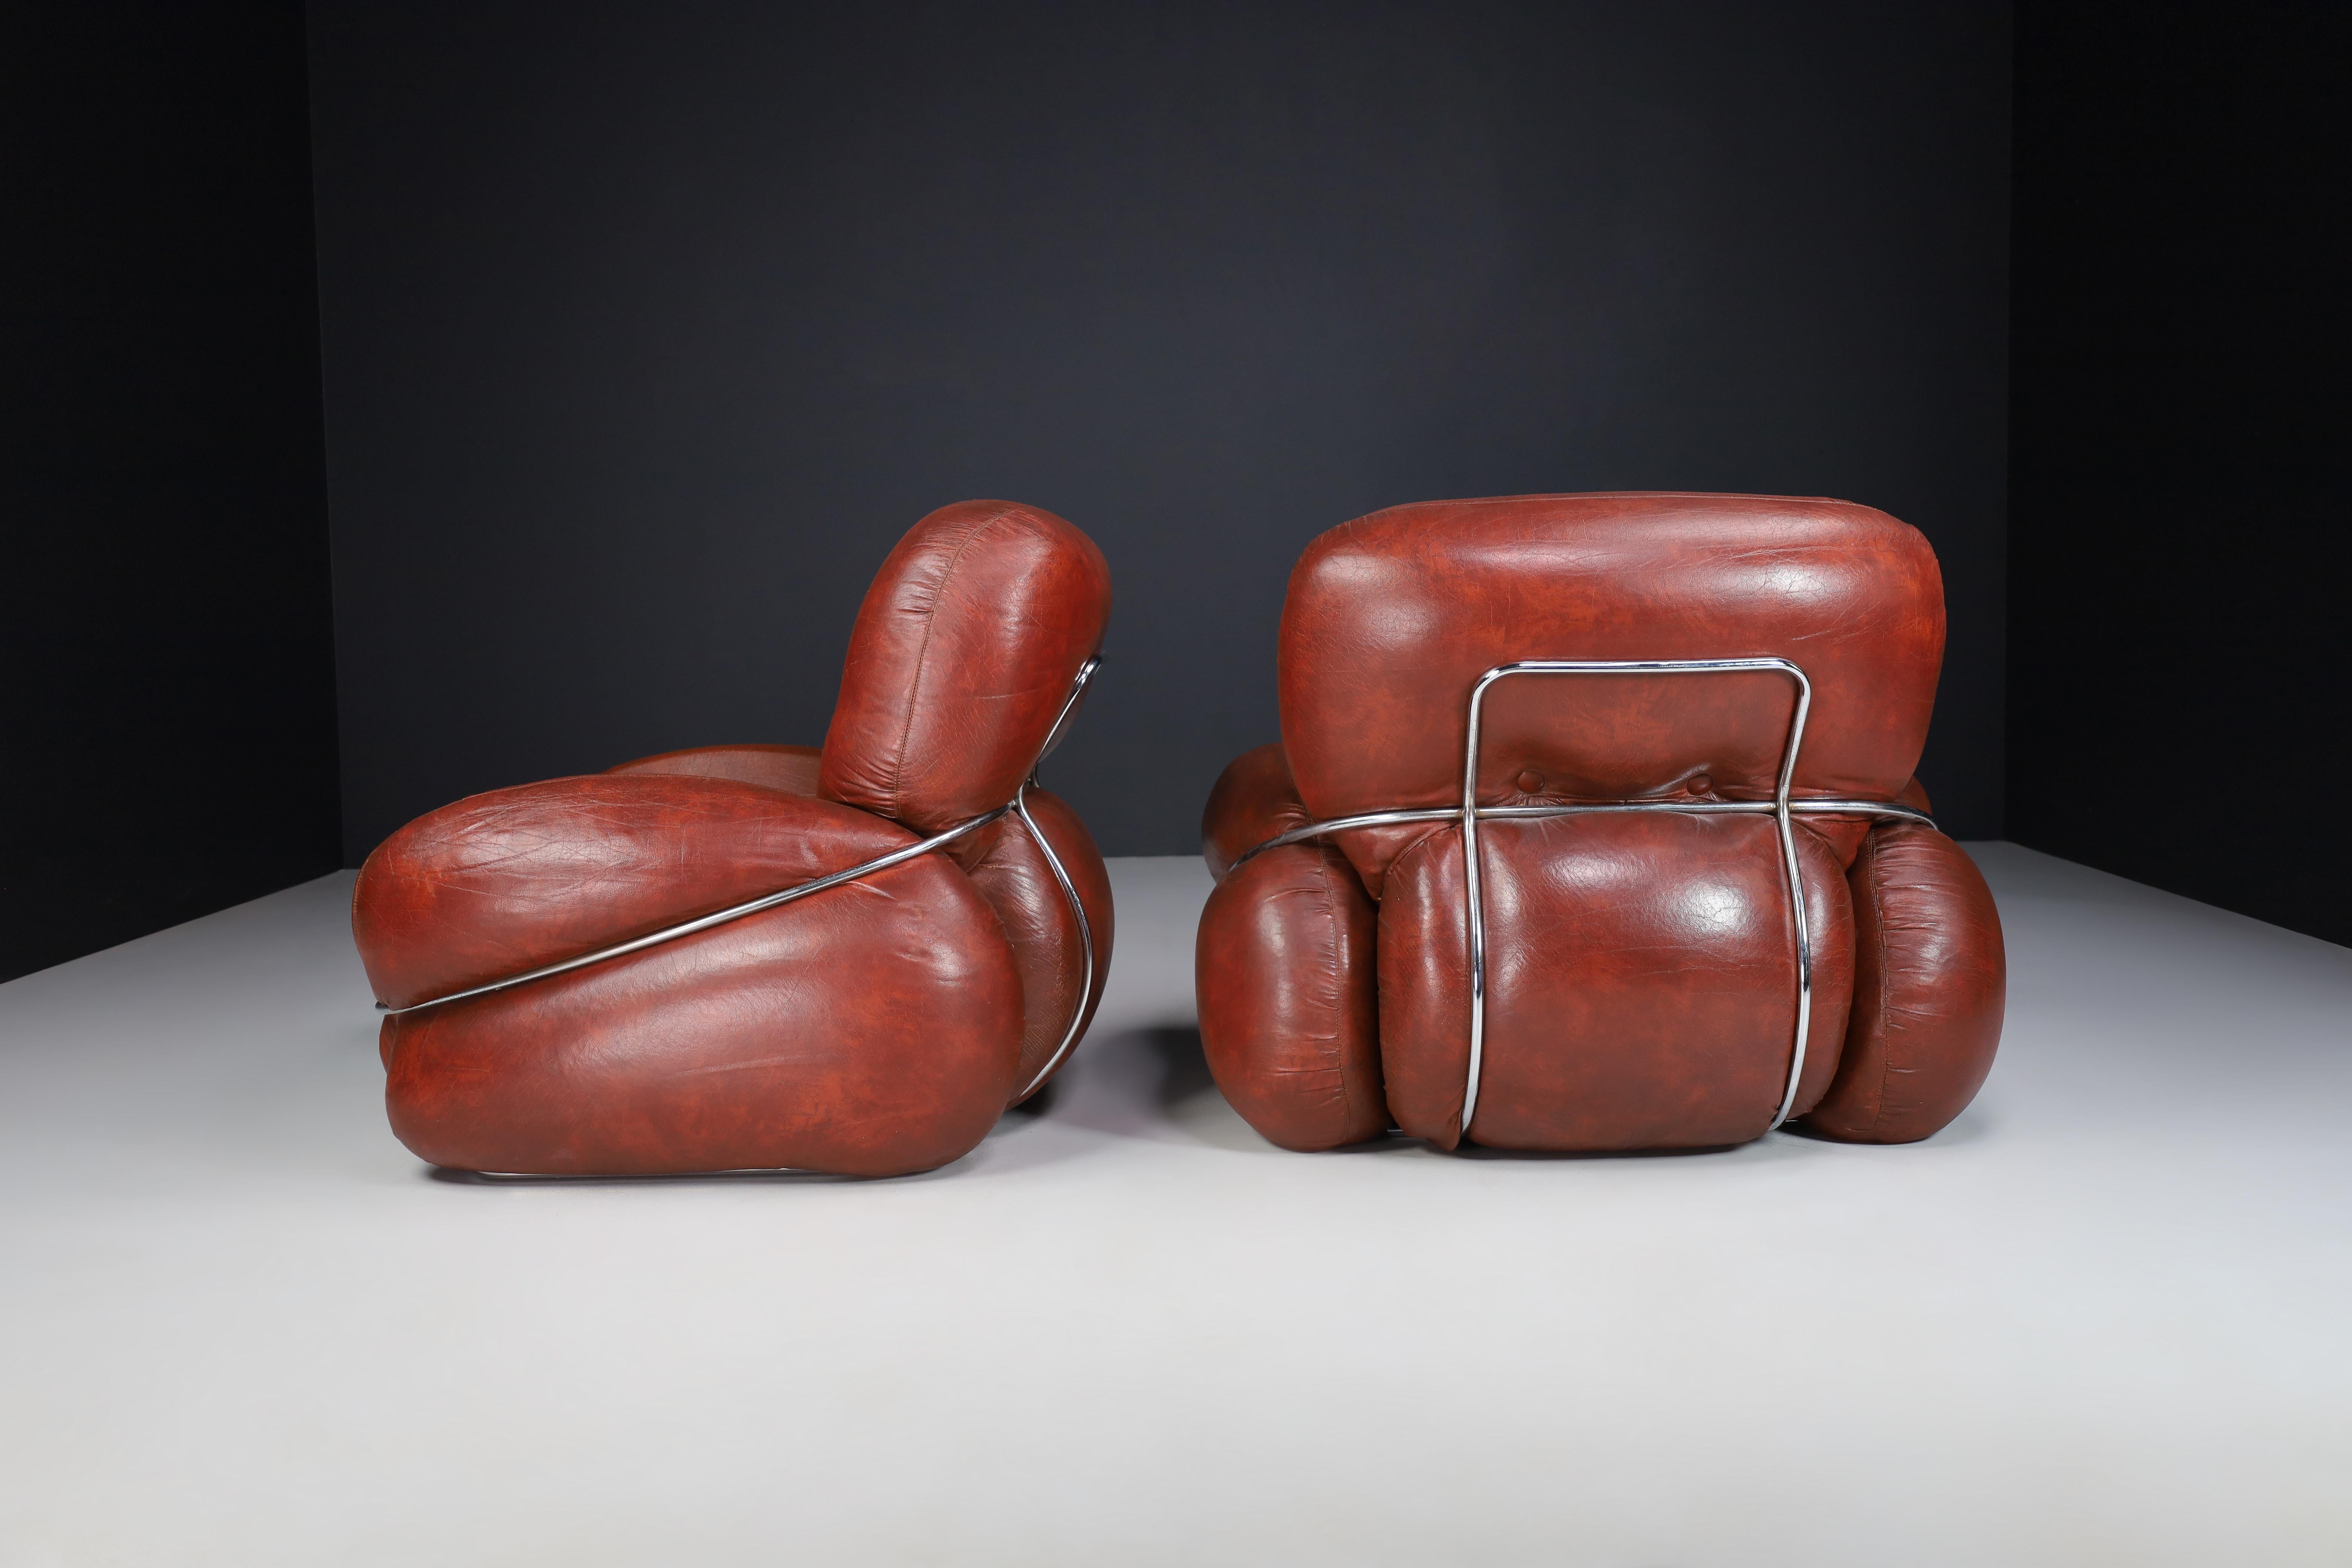 Italian Mid-Century Modern Leather Lounge / Armchairs by Adriano Piazzesi, Italy 1970s For Sale